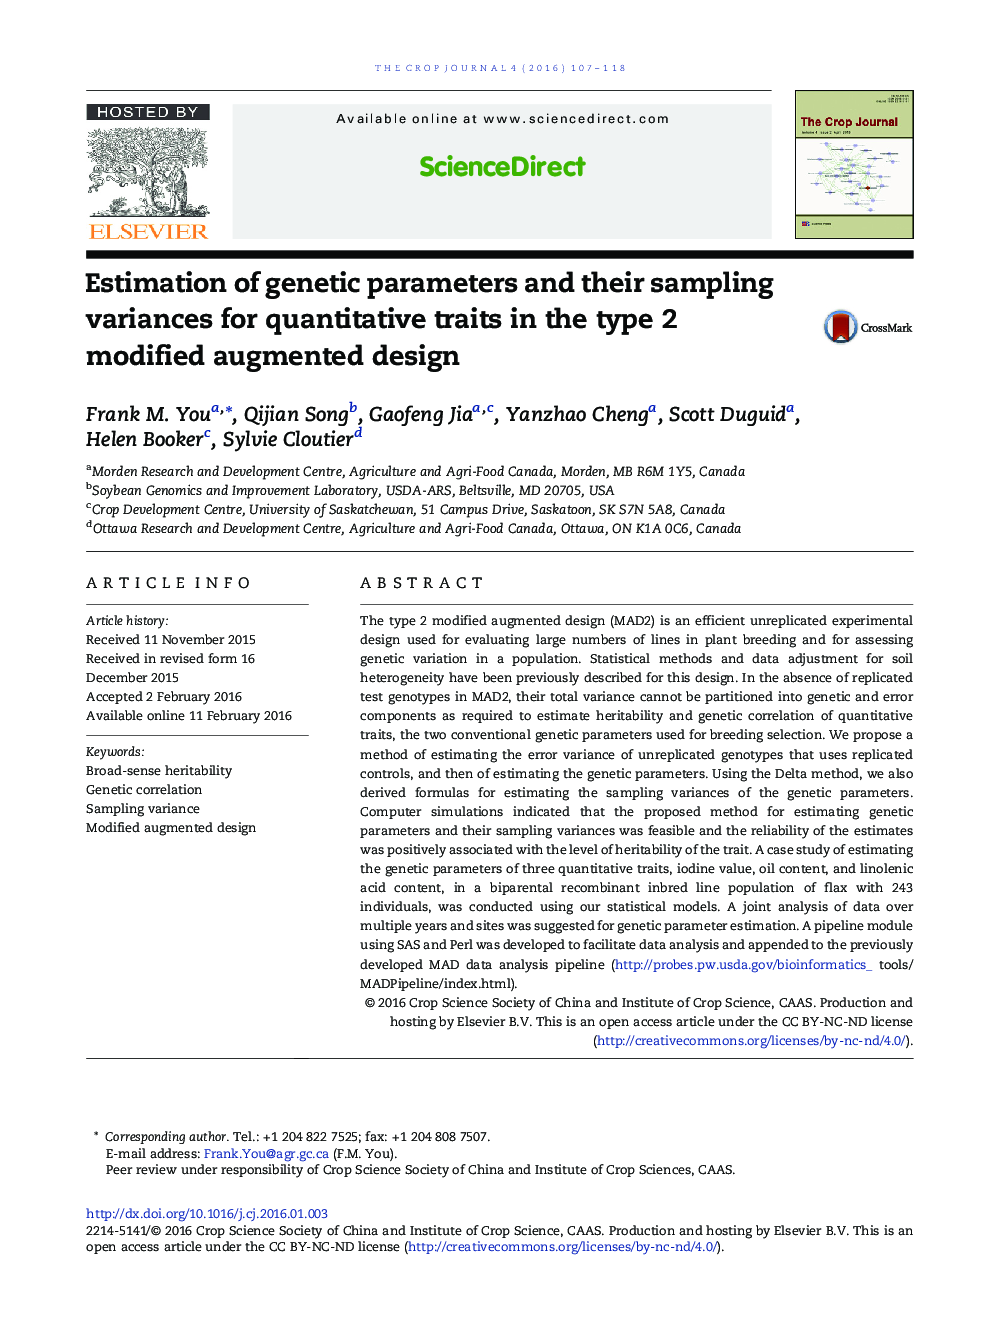 Estimation of genetic parameters and their sampling variances for quantitative traits in the type 2 modified augmented design 